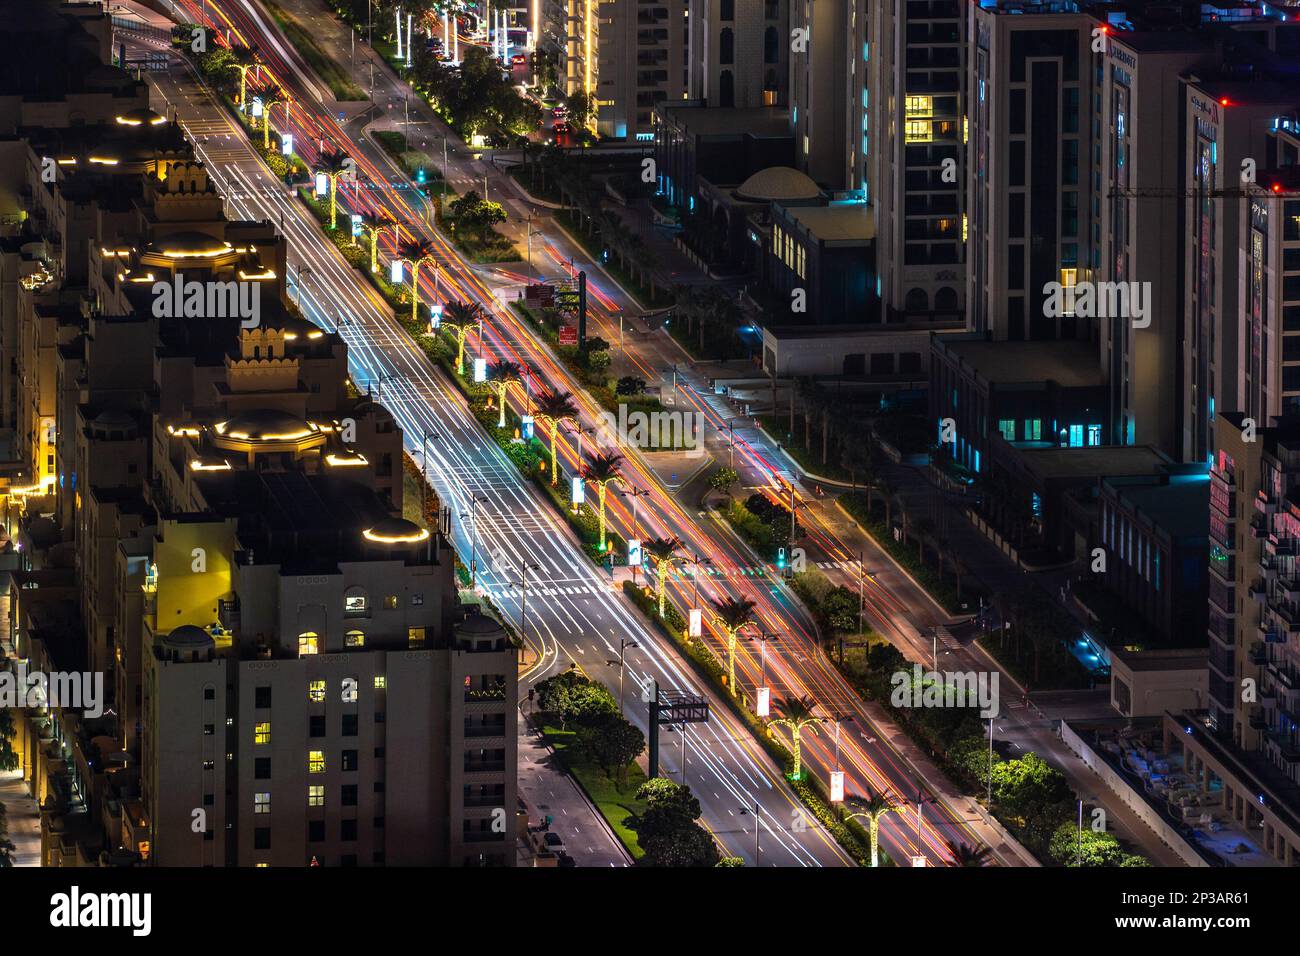 Dubai, UAE -  Dec 05 2021: Aerial view of highway traffic on the Palm Jumeirah Dubai at night with car light trails Stock Photo